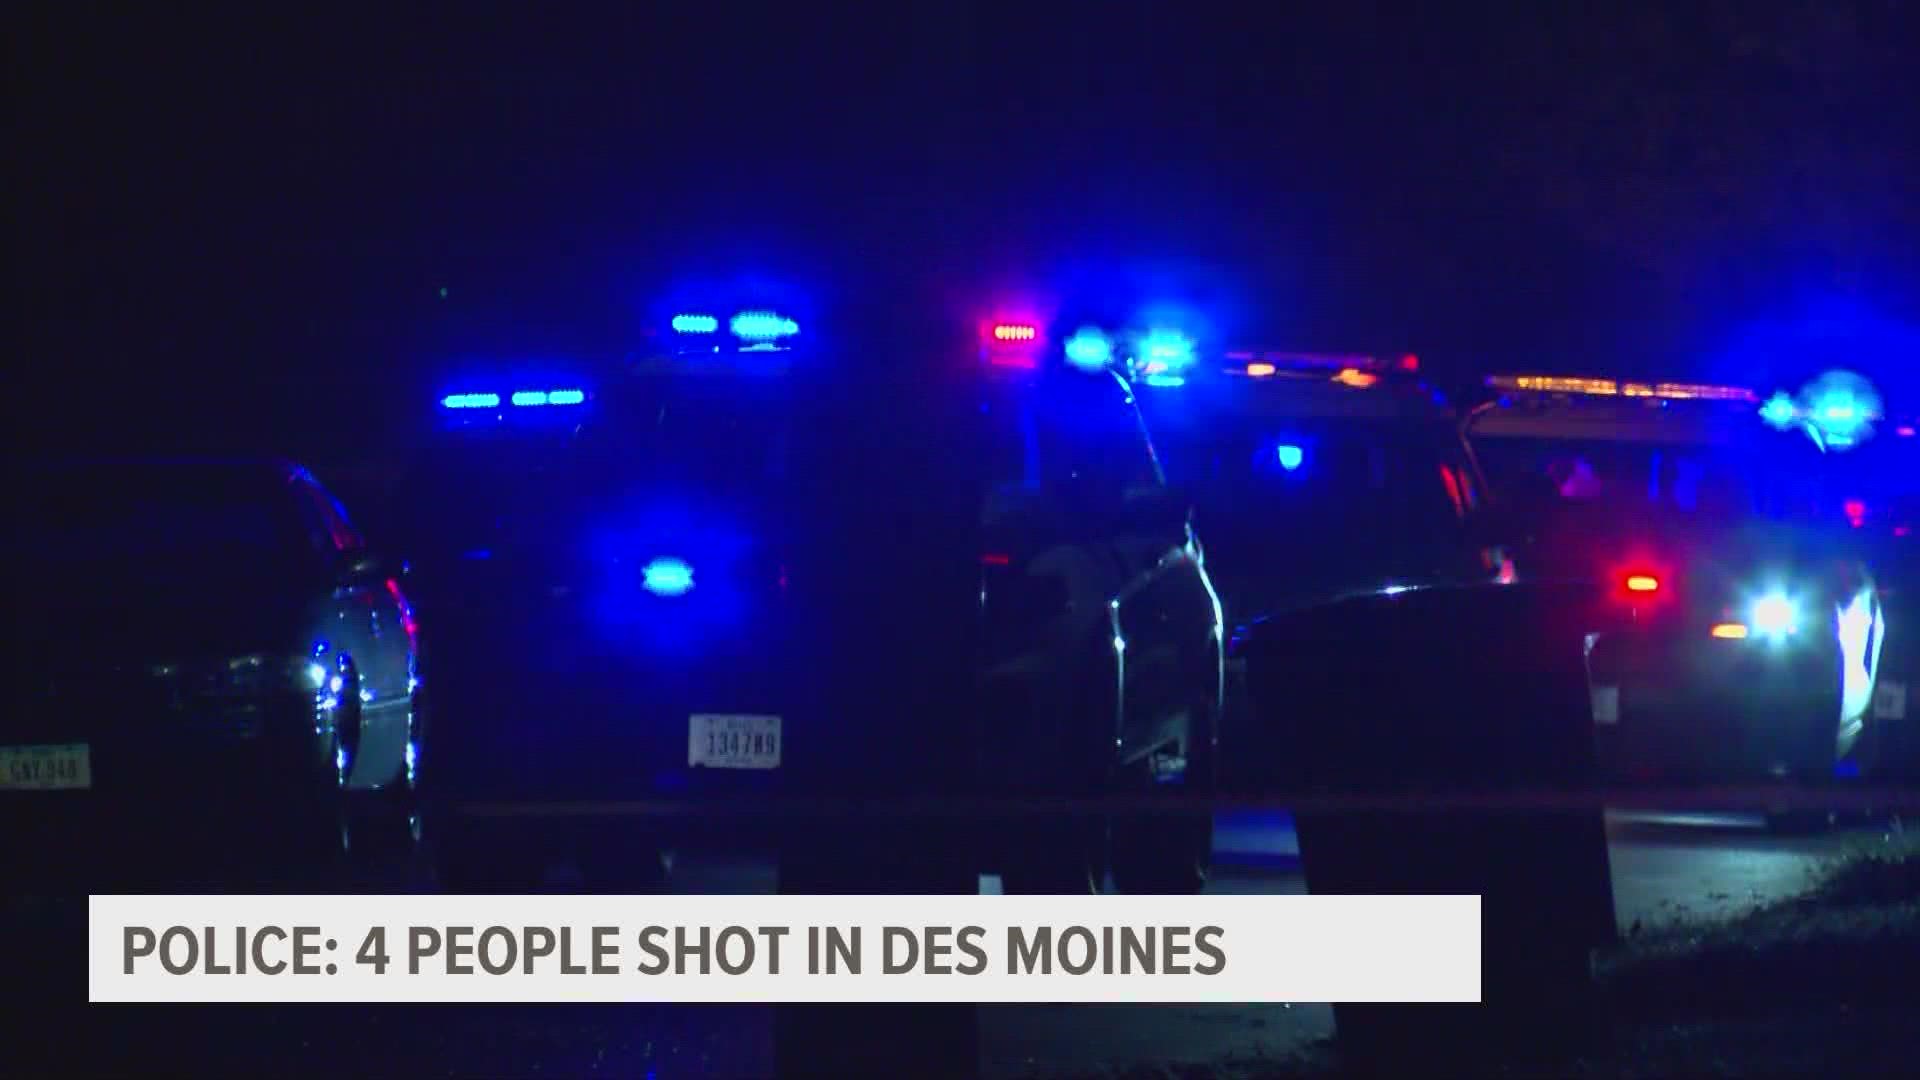 DMPD said the shooting happened Wednesday at a celebration of life gathering for a Des Moines teen who was killed in an accidental shooting earlier this year.